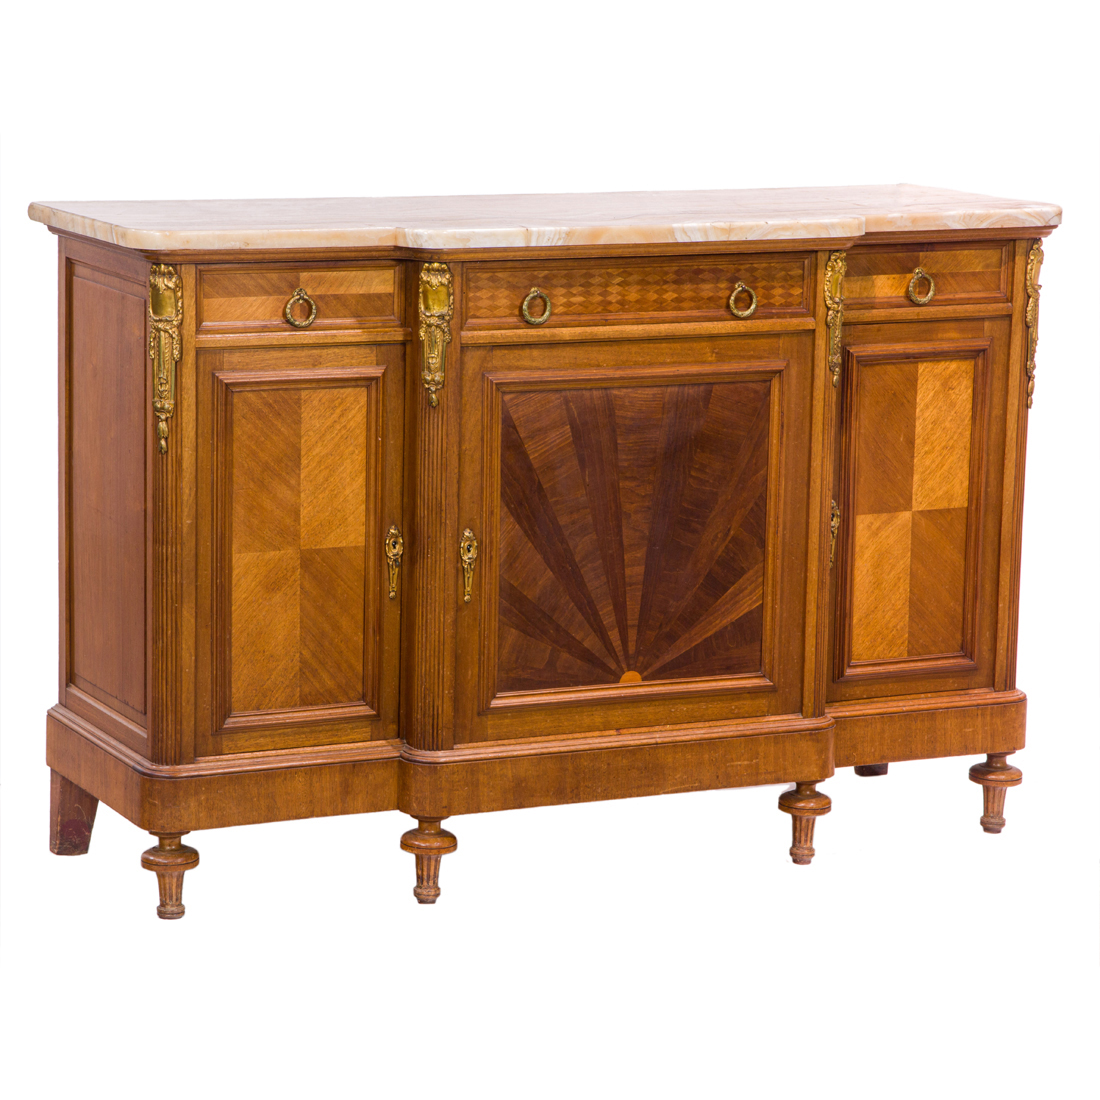 NEOCLASSICAL STYLE SIDEBOARD Neoclassical 2cdcdd